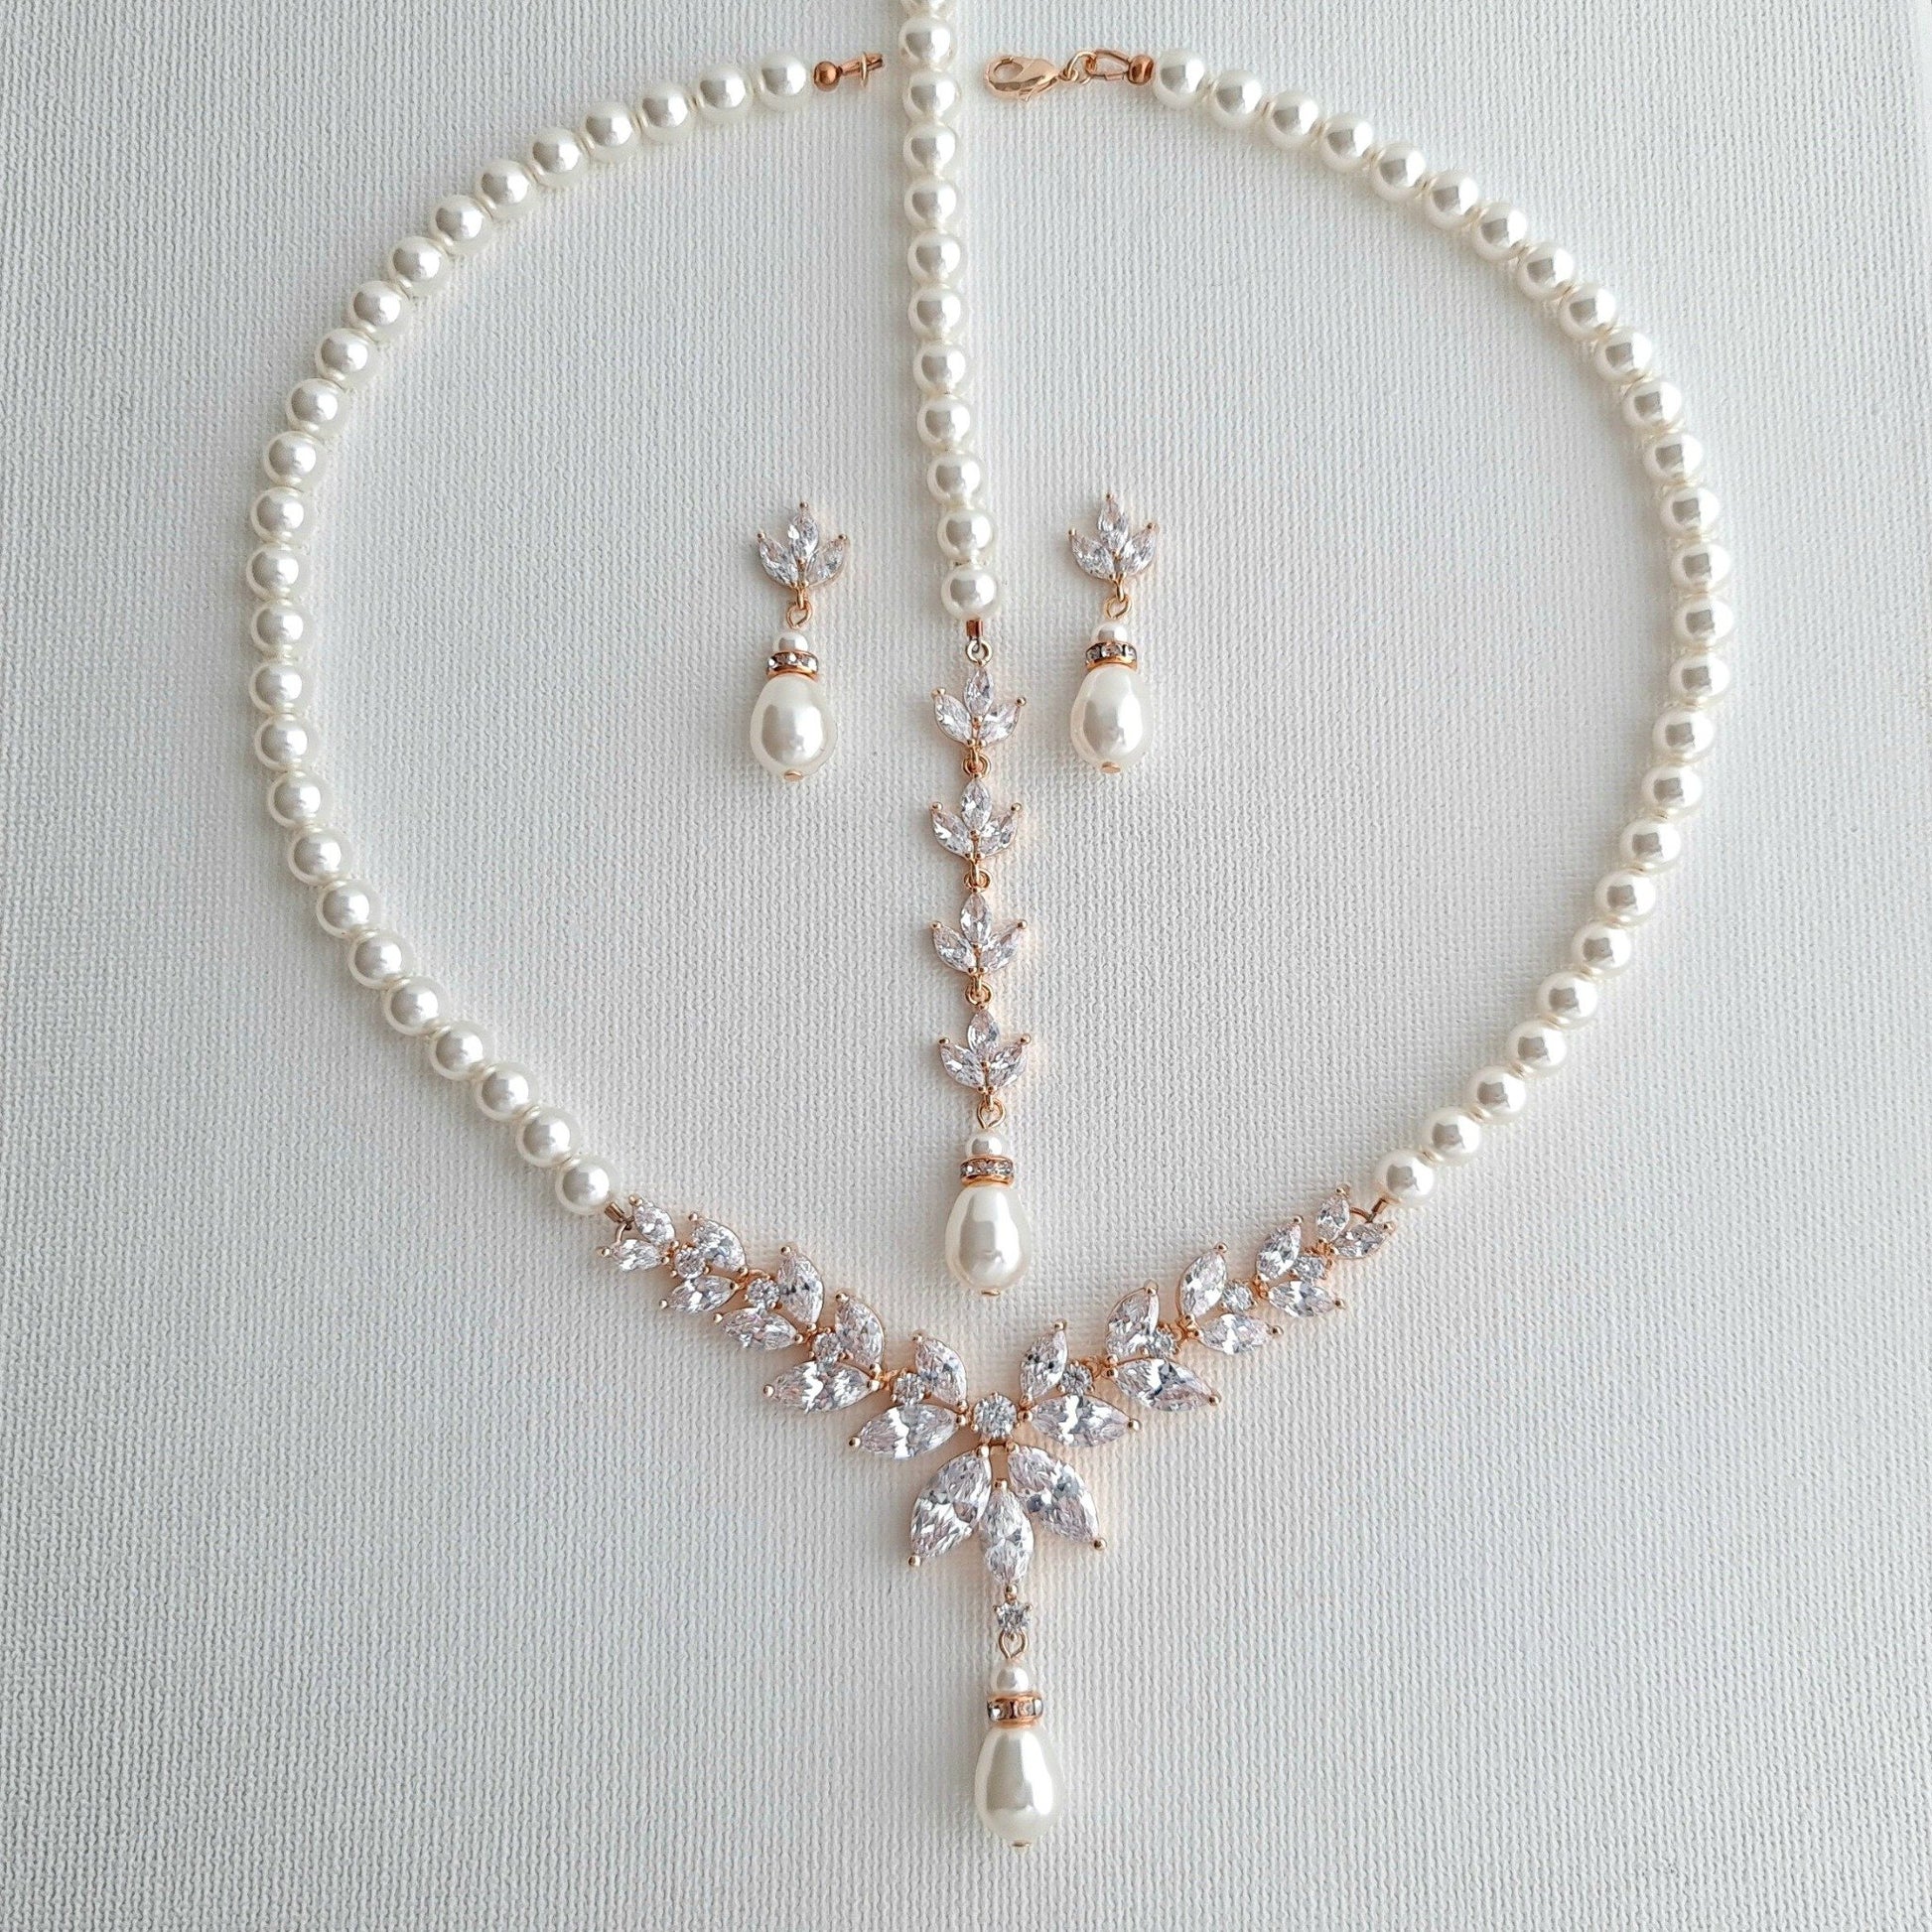  Rose Gold Pearl Necklace and Earrings Wedding Jewelry Set